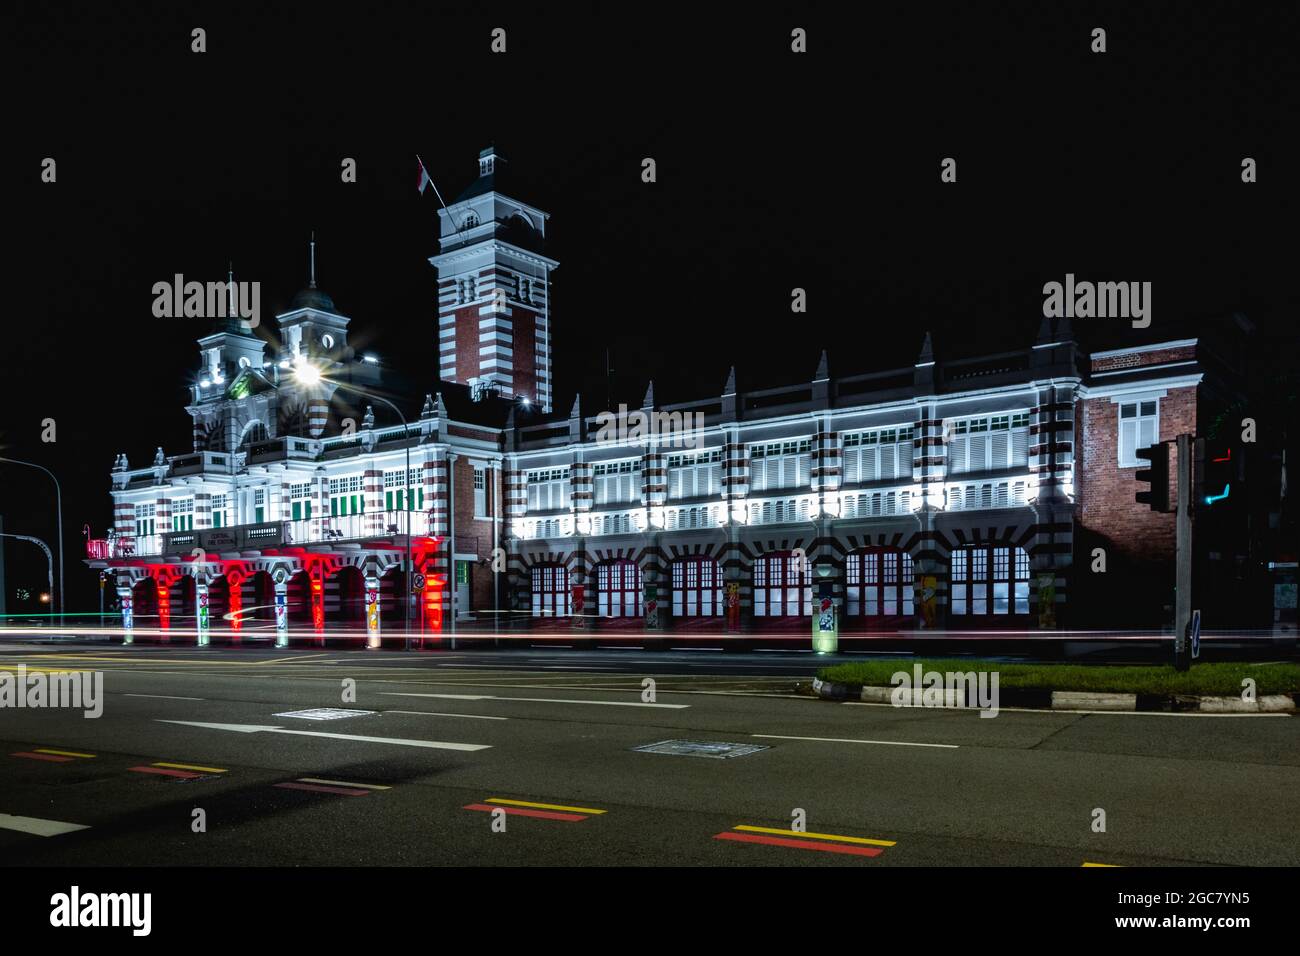 Night scene of The Central Fire Station, Singapore's oldest fire station built in 1908. Stock Photo